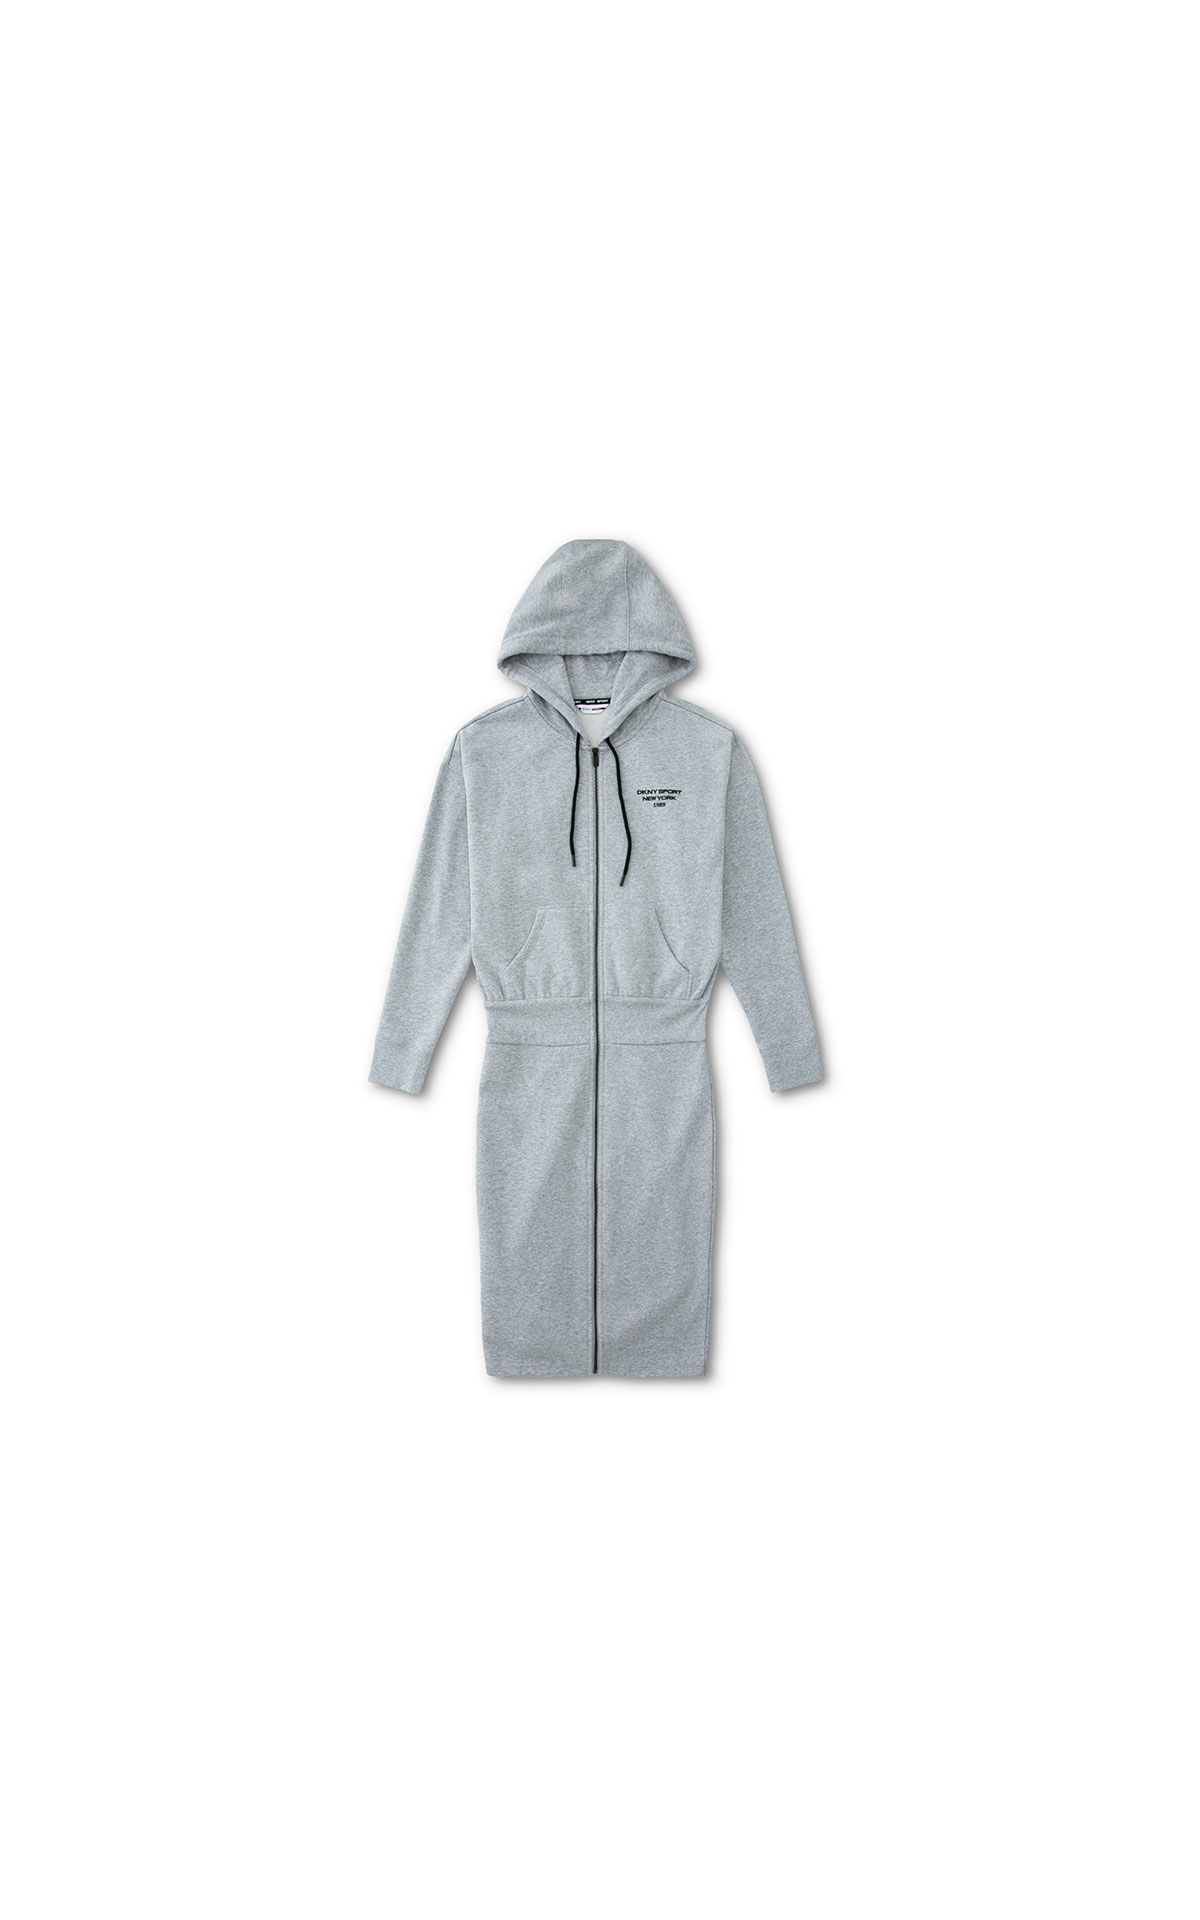 DKNY Hooded dress from Bicester Village